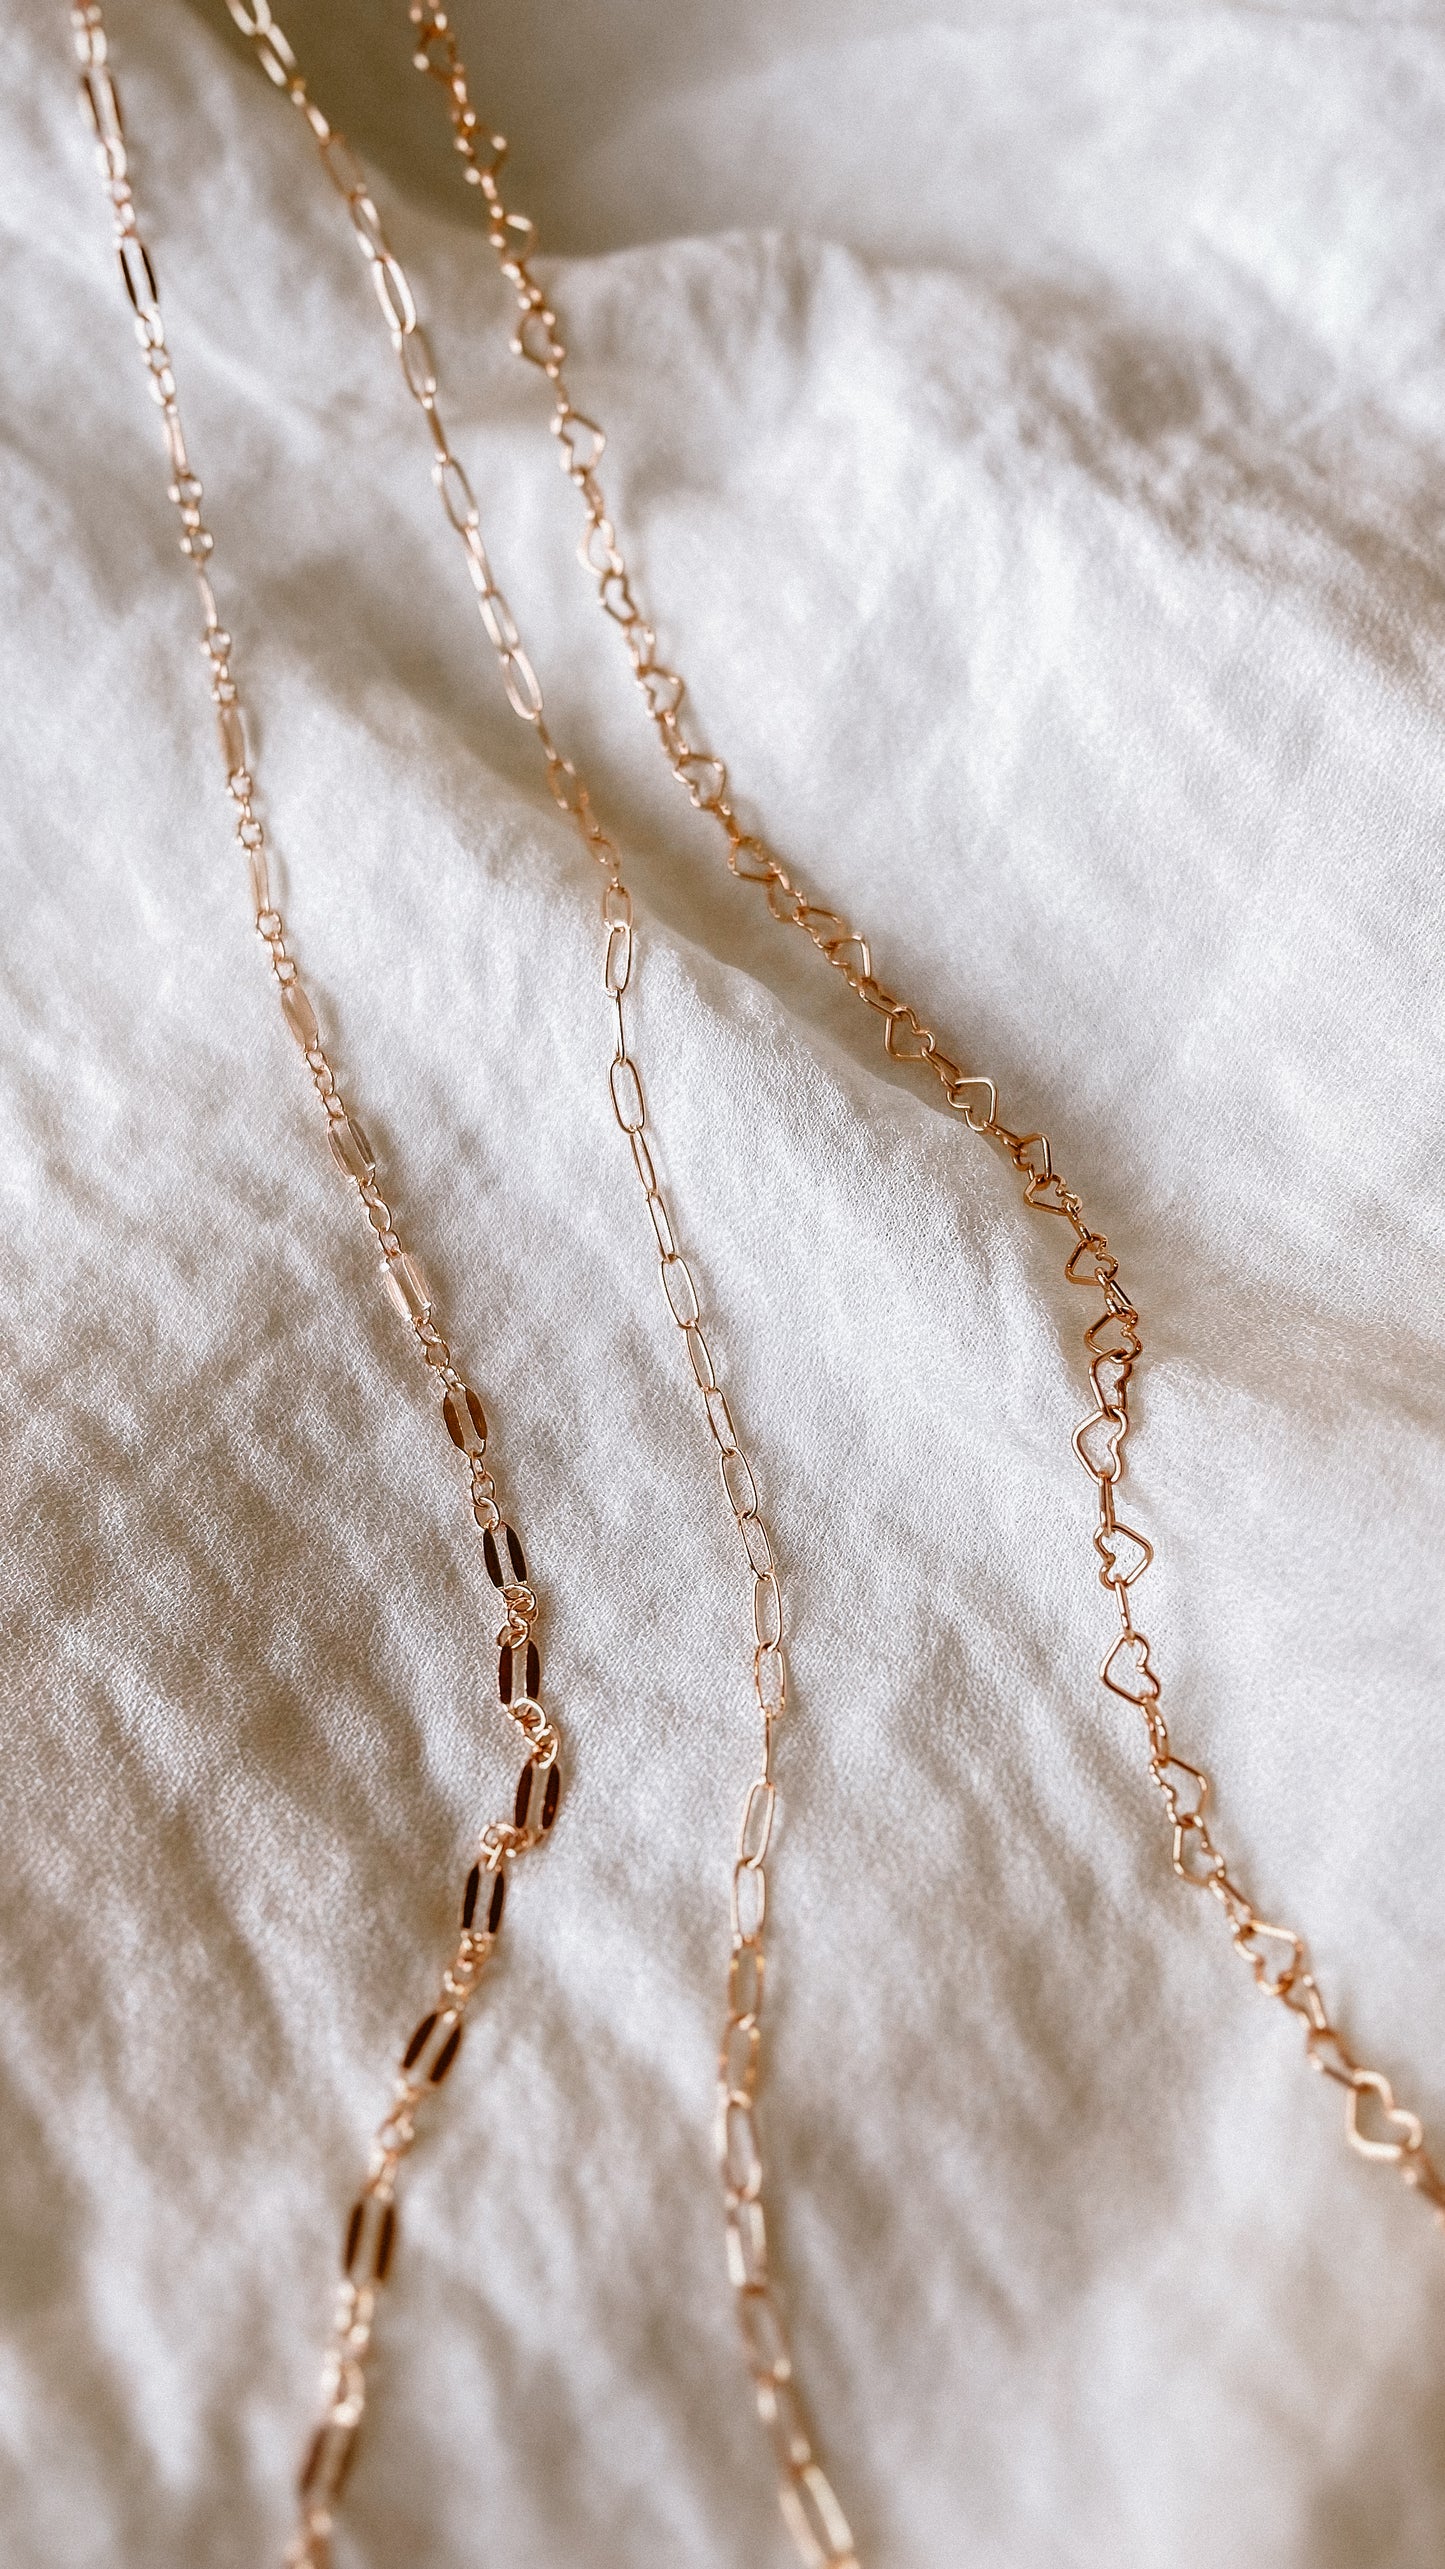 Sadia Sequin Chain in ROSE GF // RESERVATION for IN-PERSON Permanent Jewelry